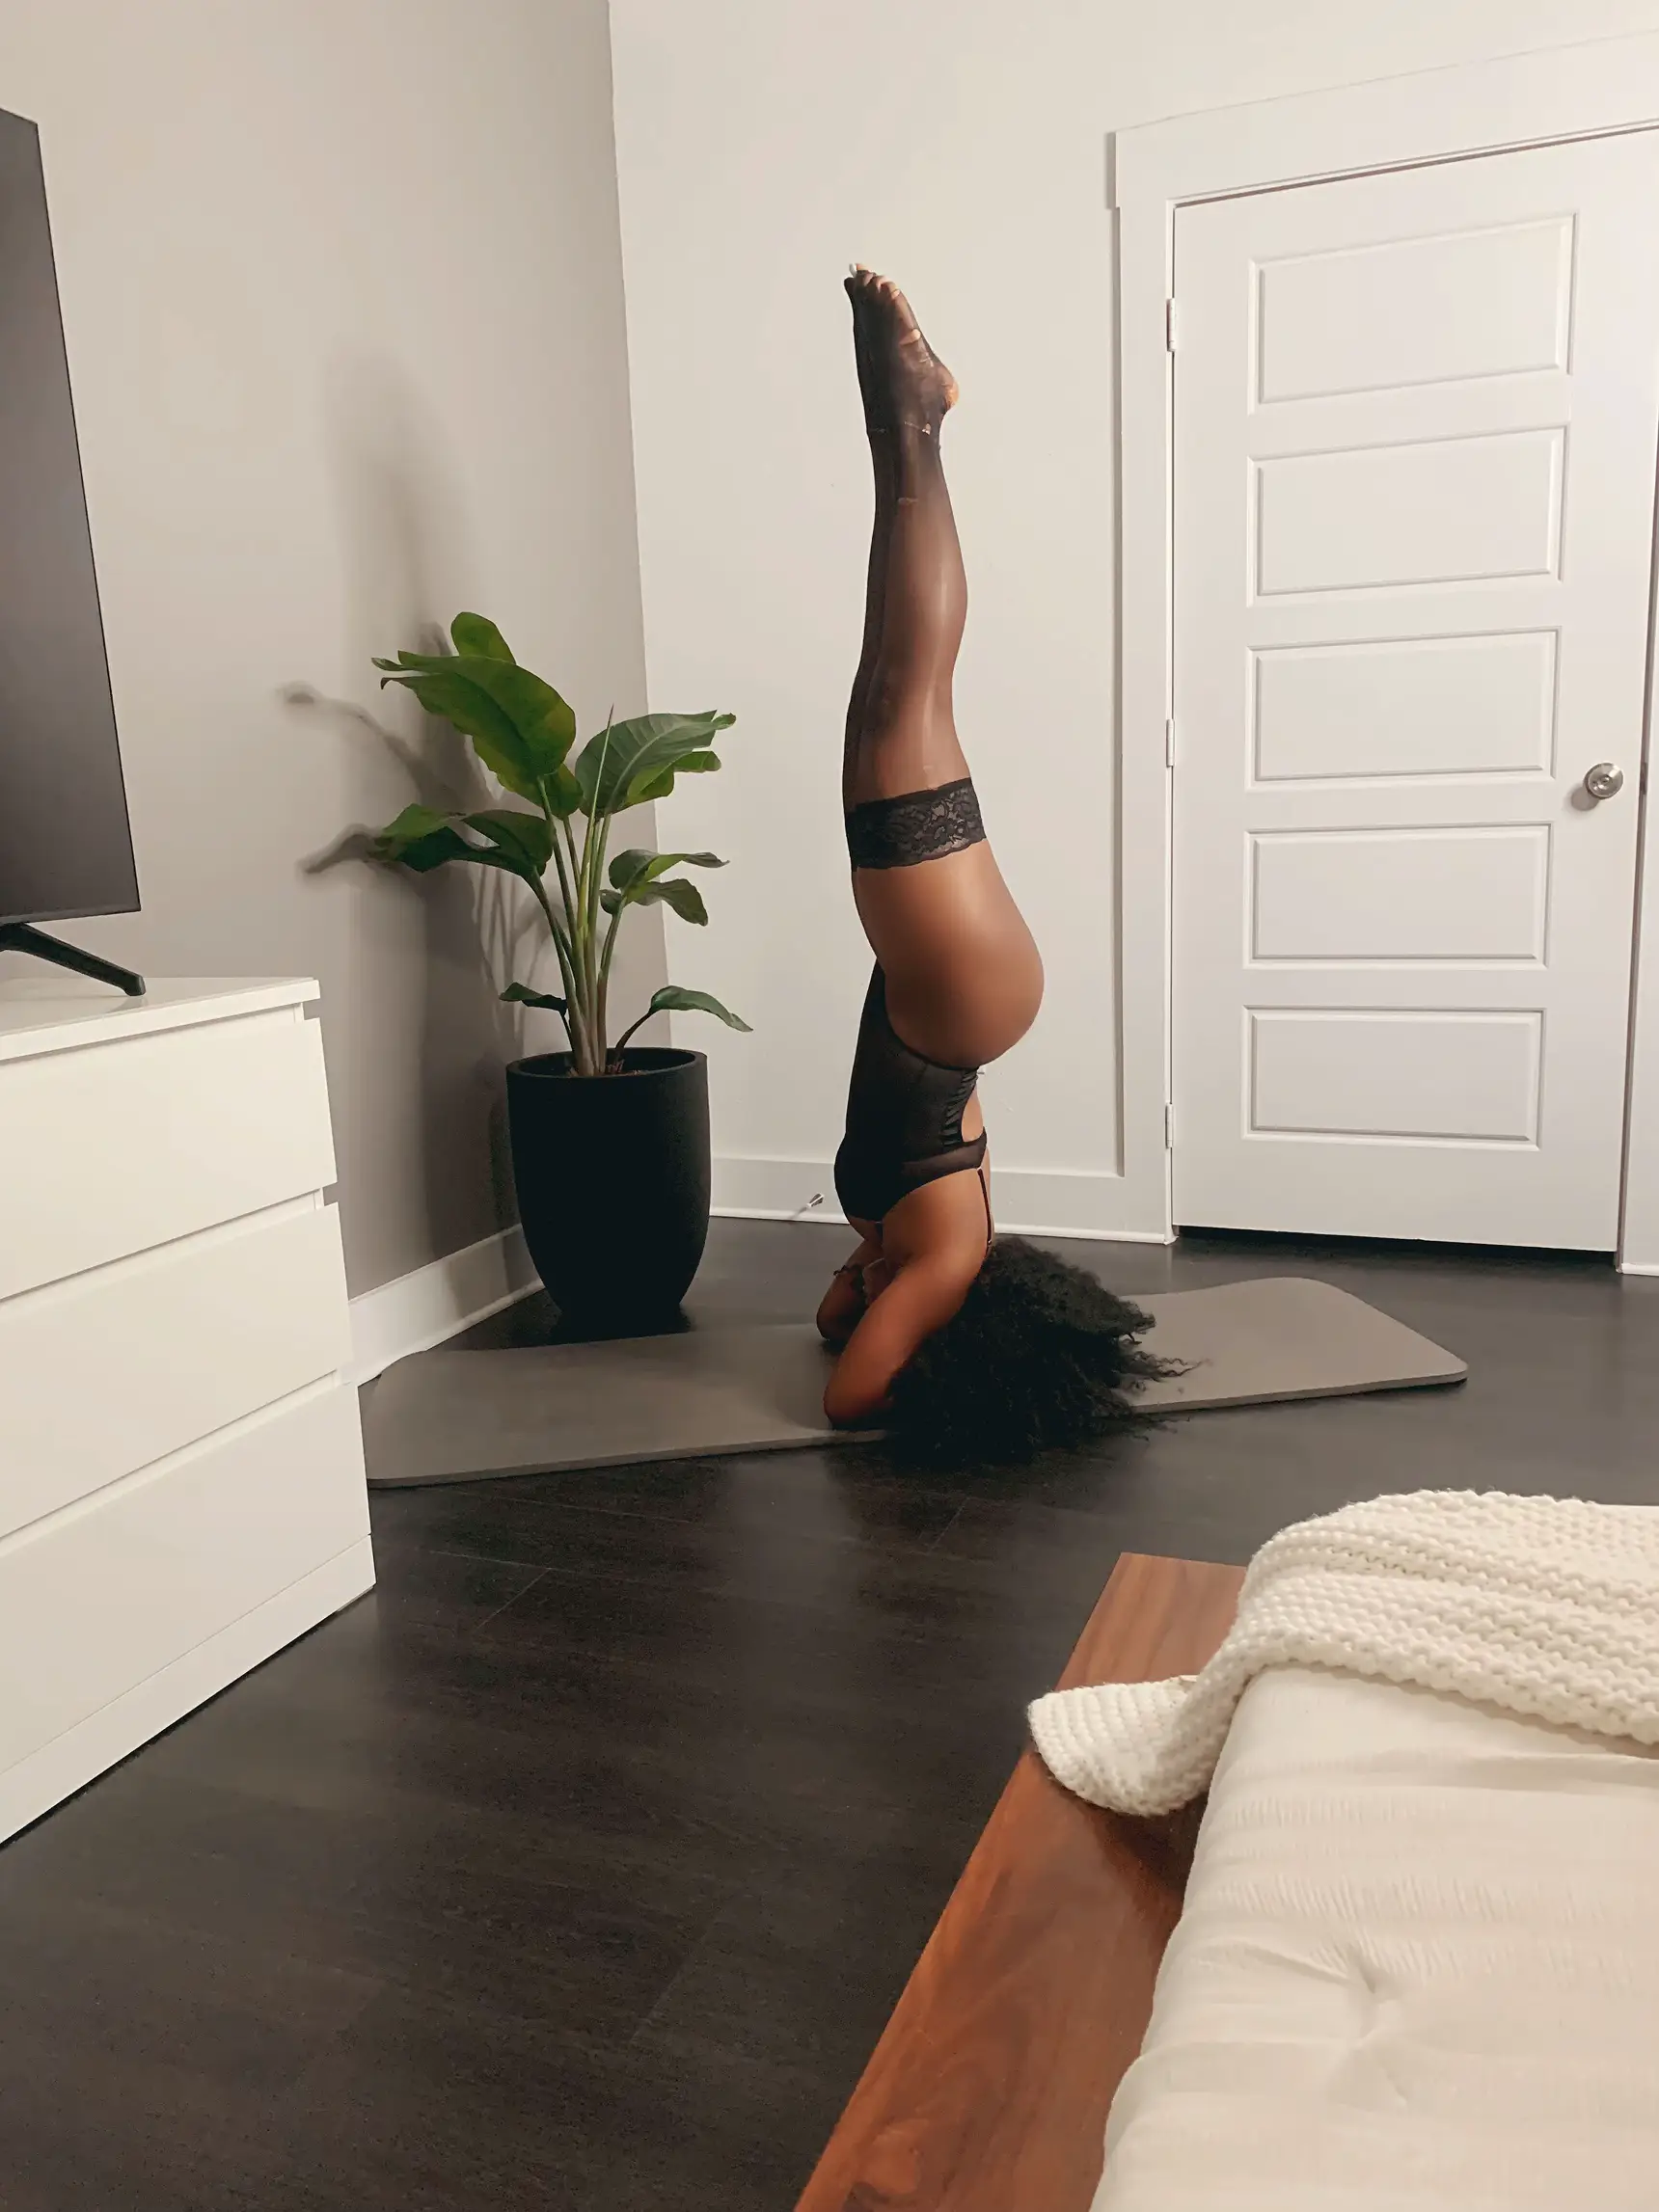 Morning stretch 🧘🏾‍♀️✨️, pilates yoga fitness fitgirl aesthetic wellness  lifestyle vision board